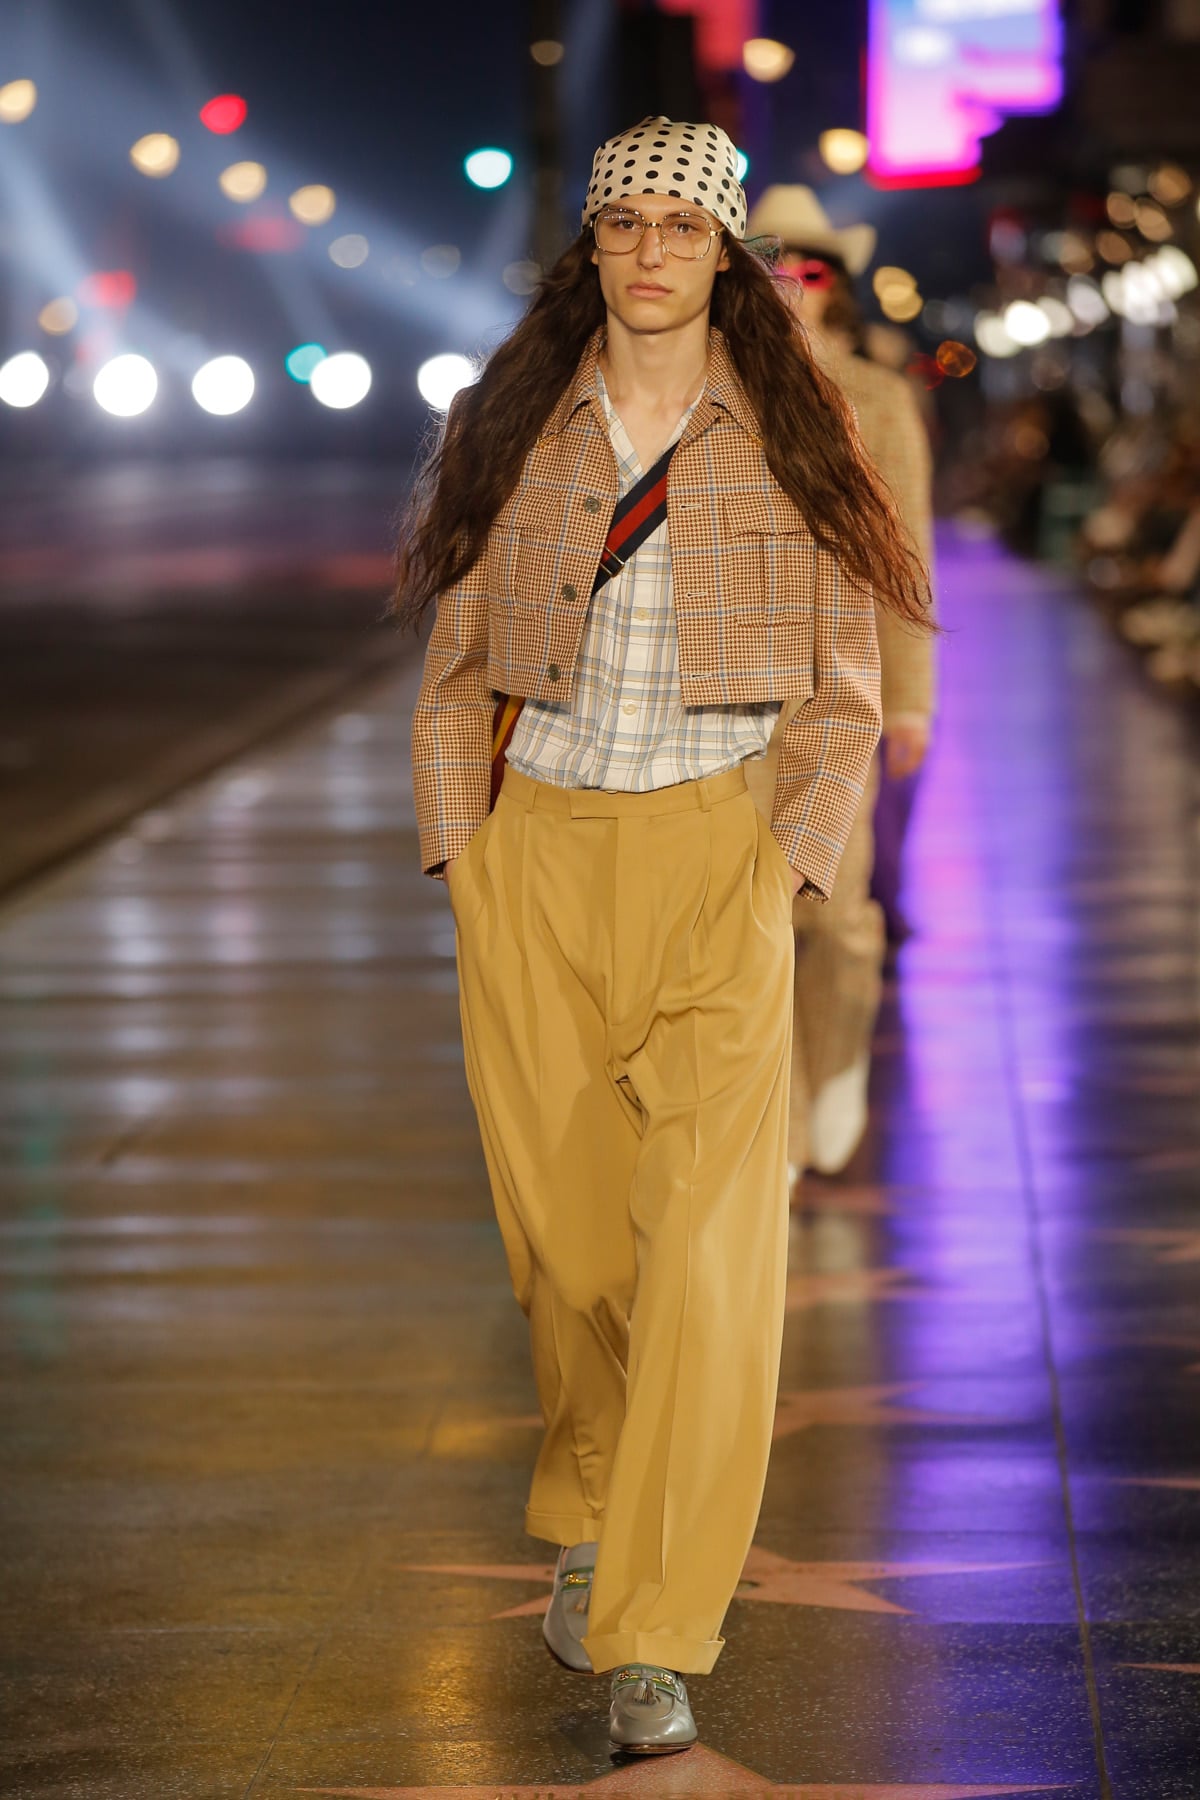 Gucci Love Parade fashion show in L.A. – New York Daily News